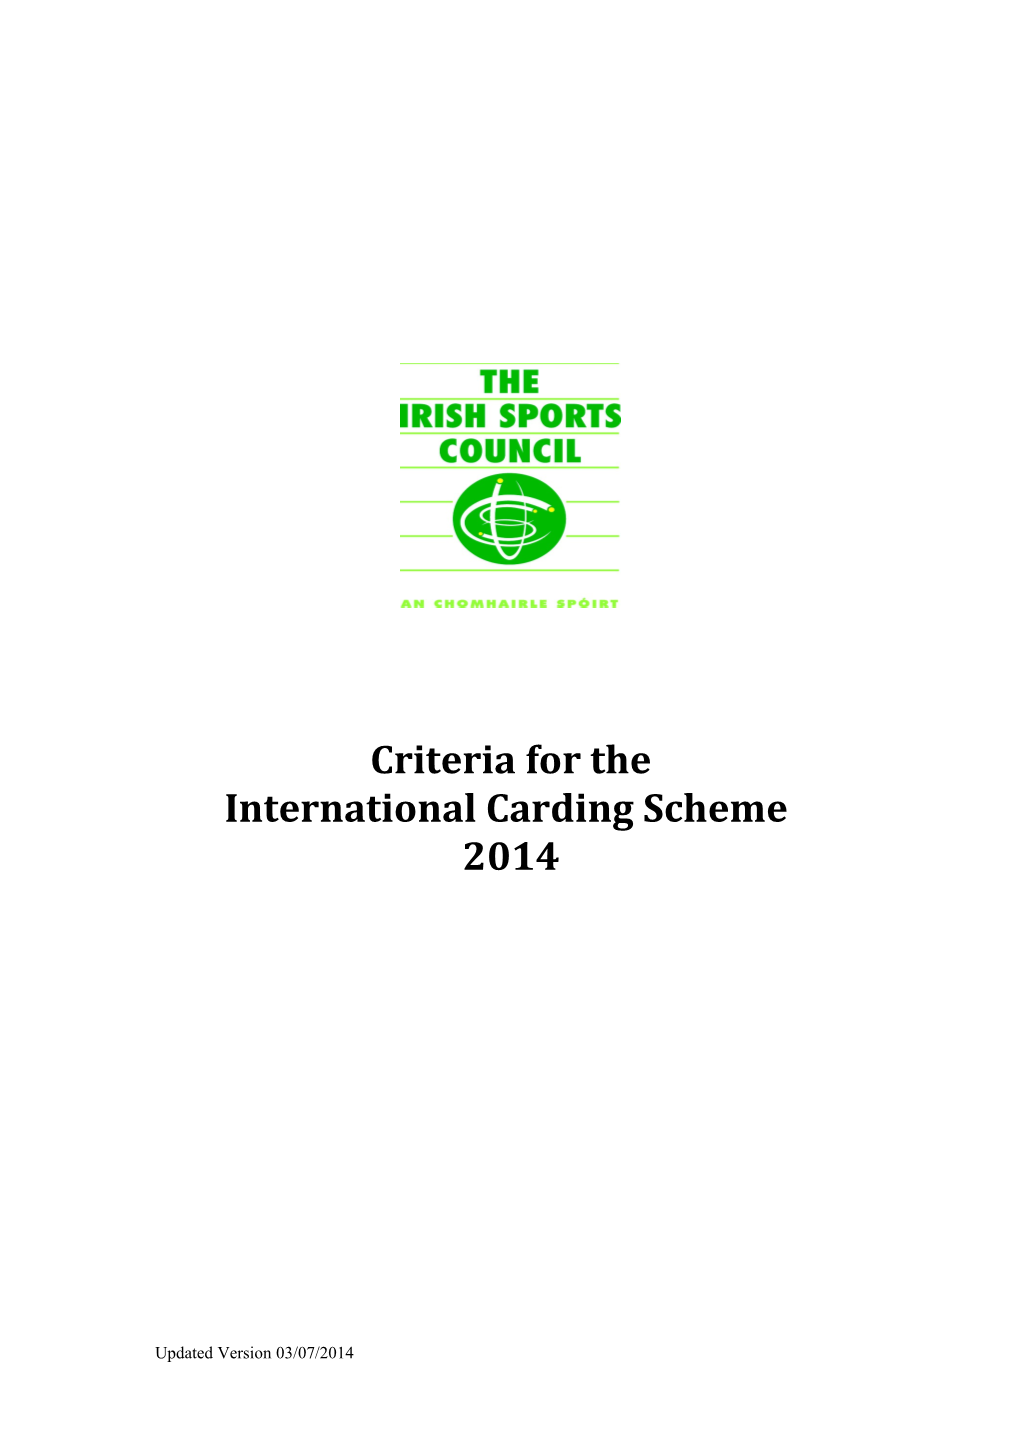 Sports Included on the 2014 Carding Scheme Are